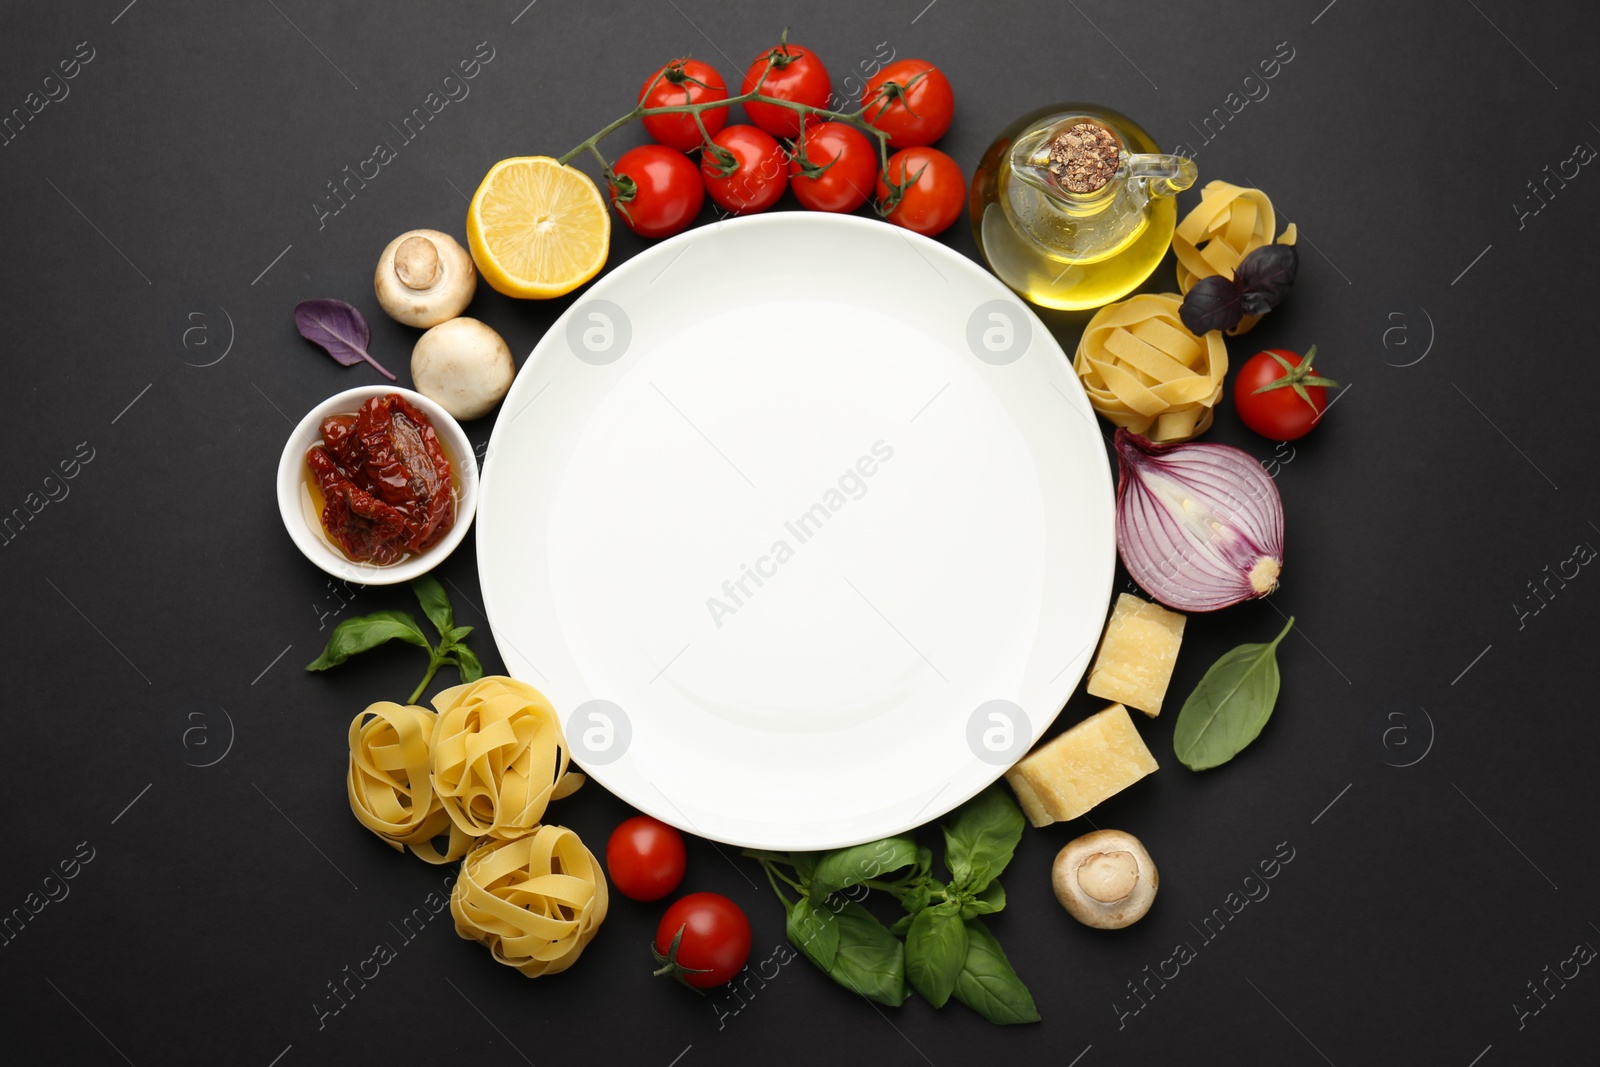 Photo of Plate surrounded by different types of pasta and products on black background, flat lay. Space for text